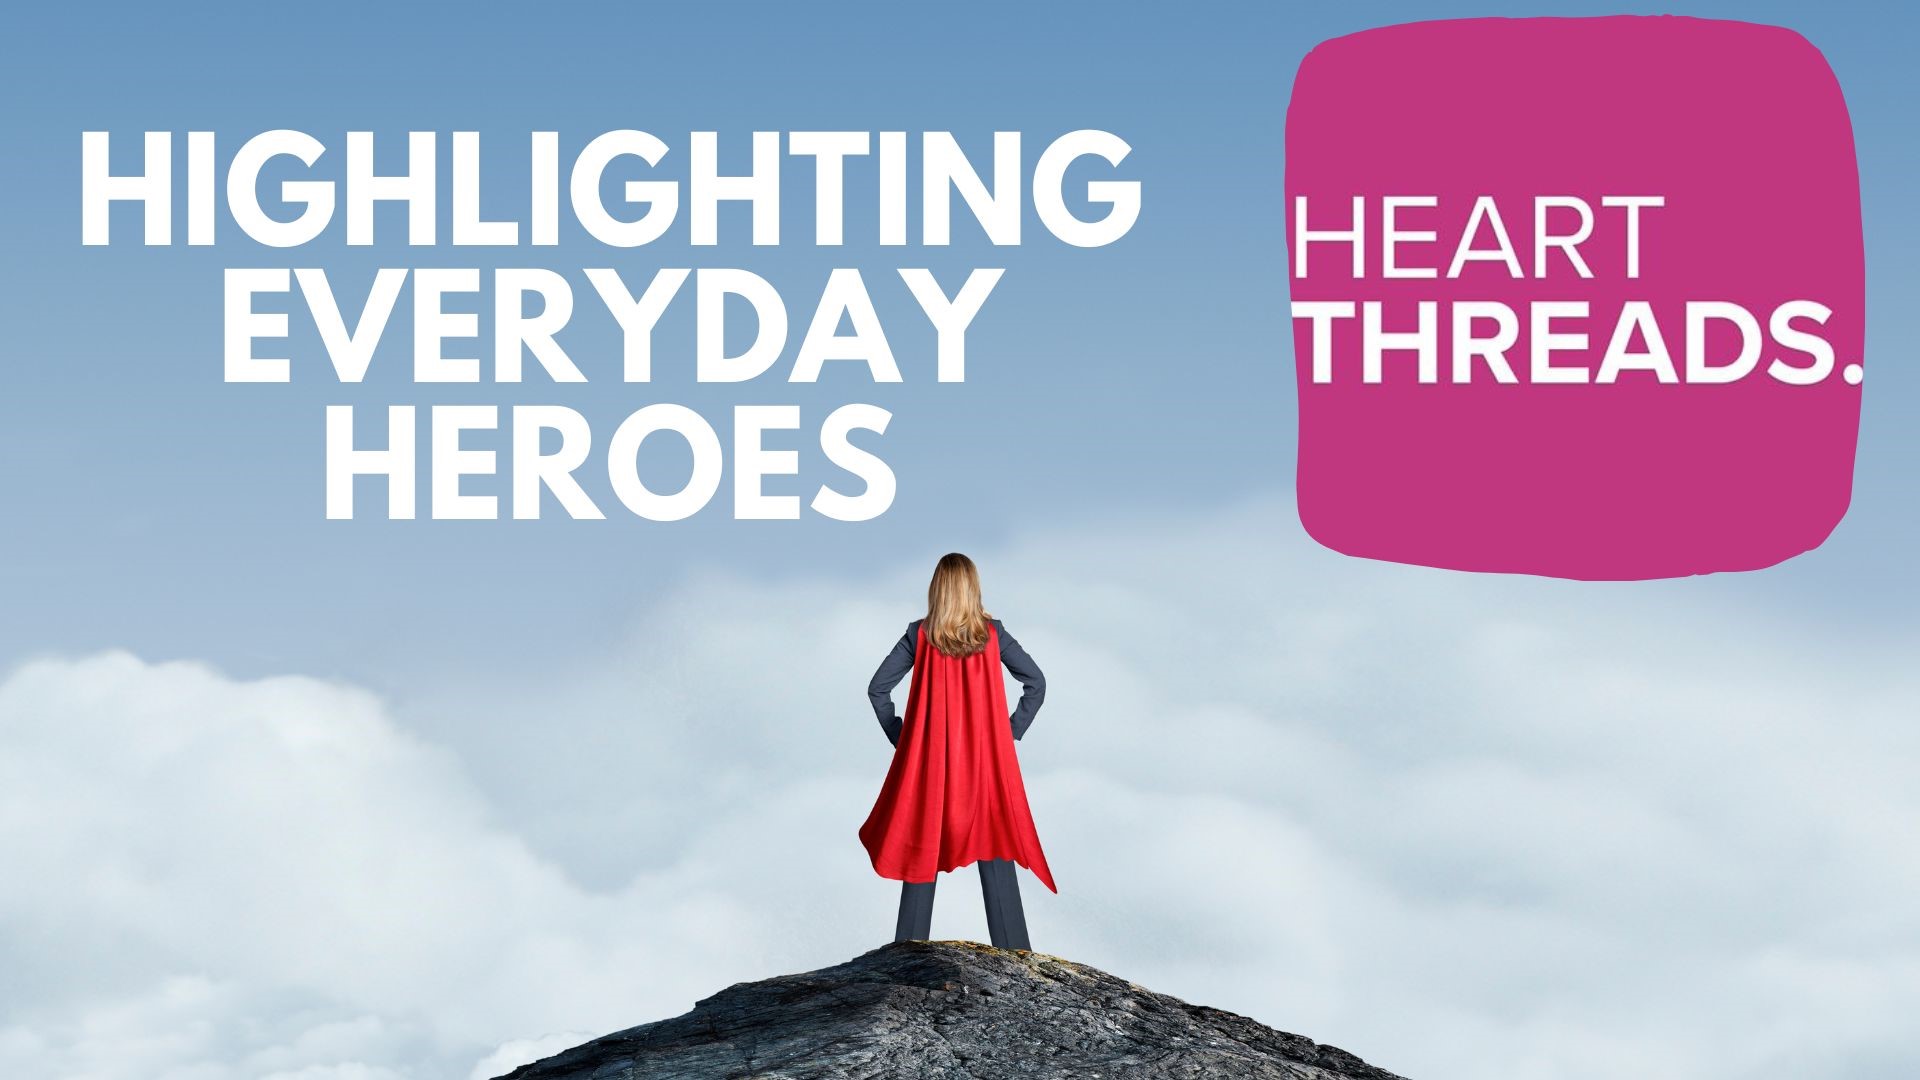 A collection of heartwarming stories to highlight everyday heroes, from health care workers to family members going above and beyond to save a life.